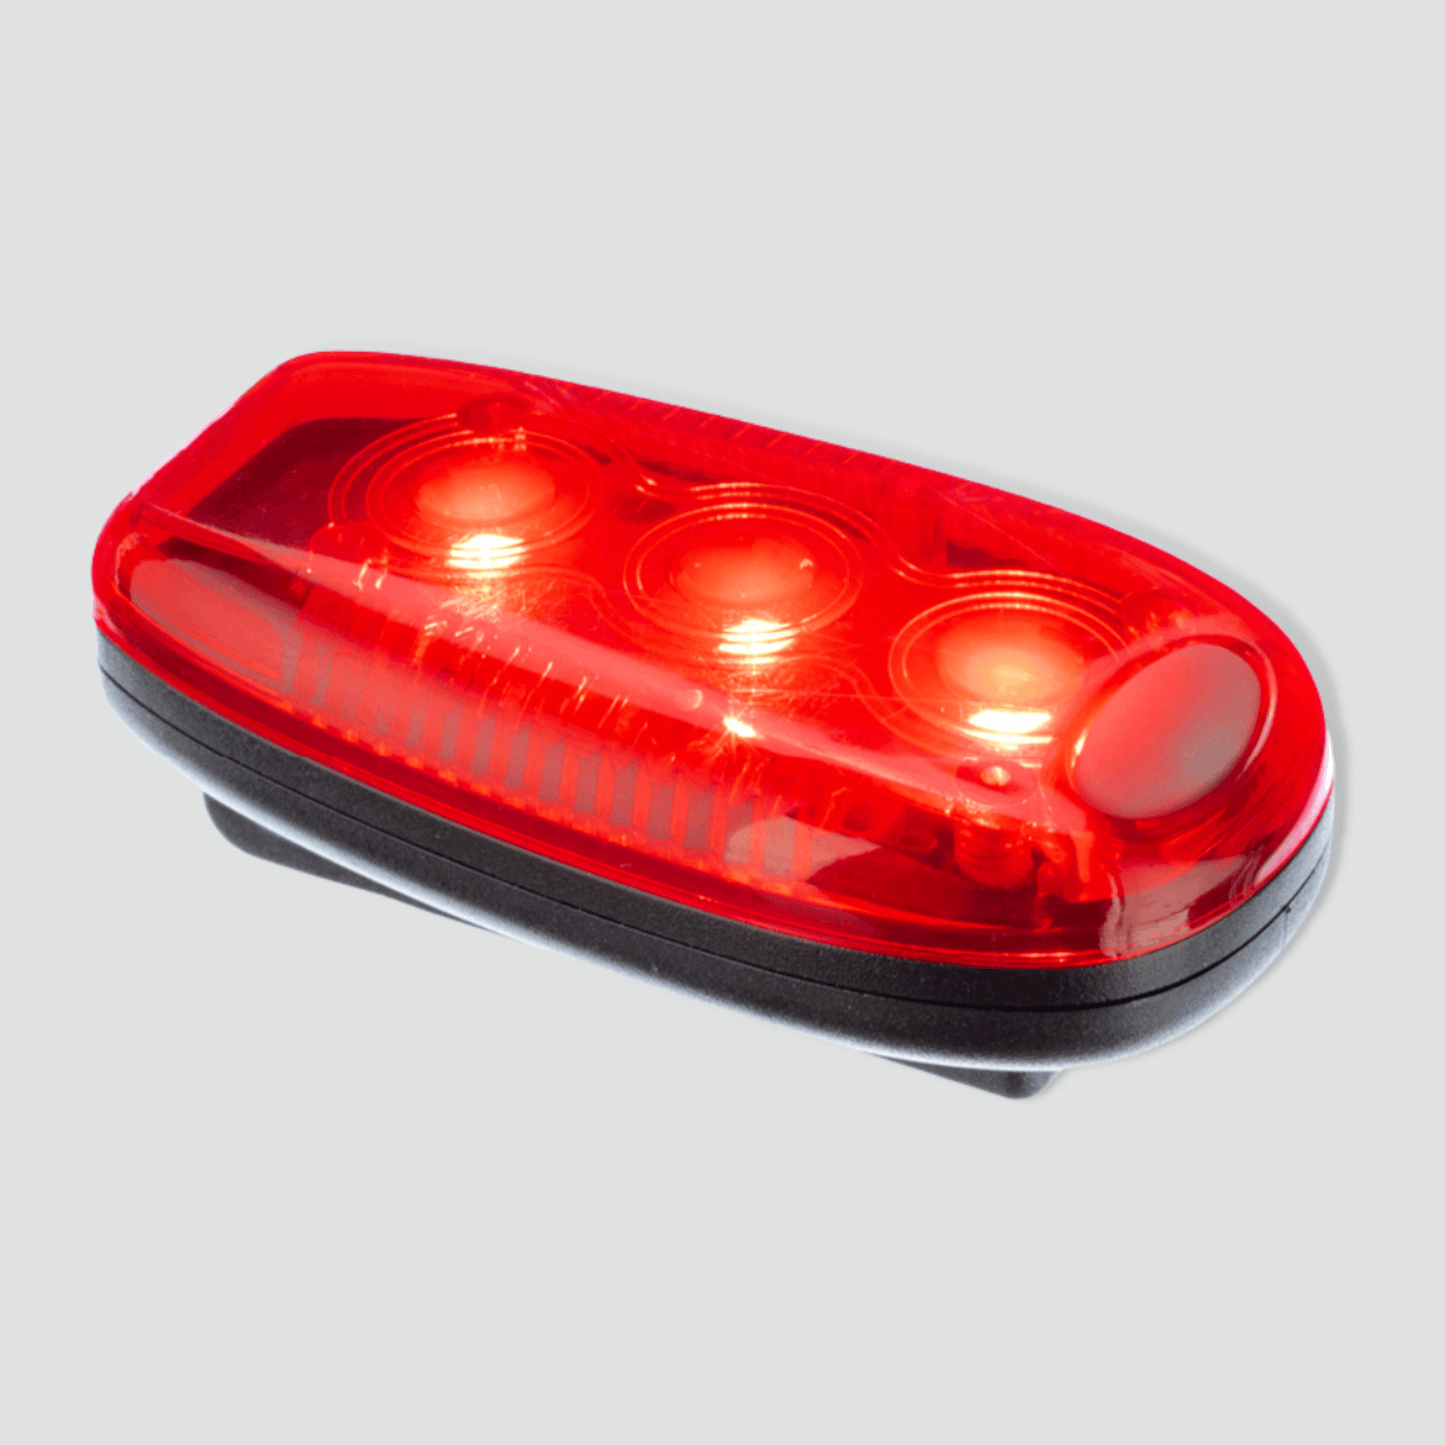 Red safety light for increased visibility outdoors